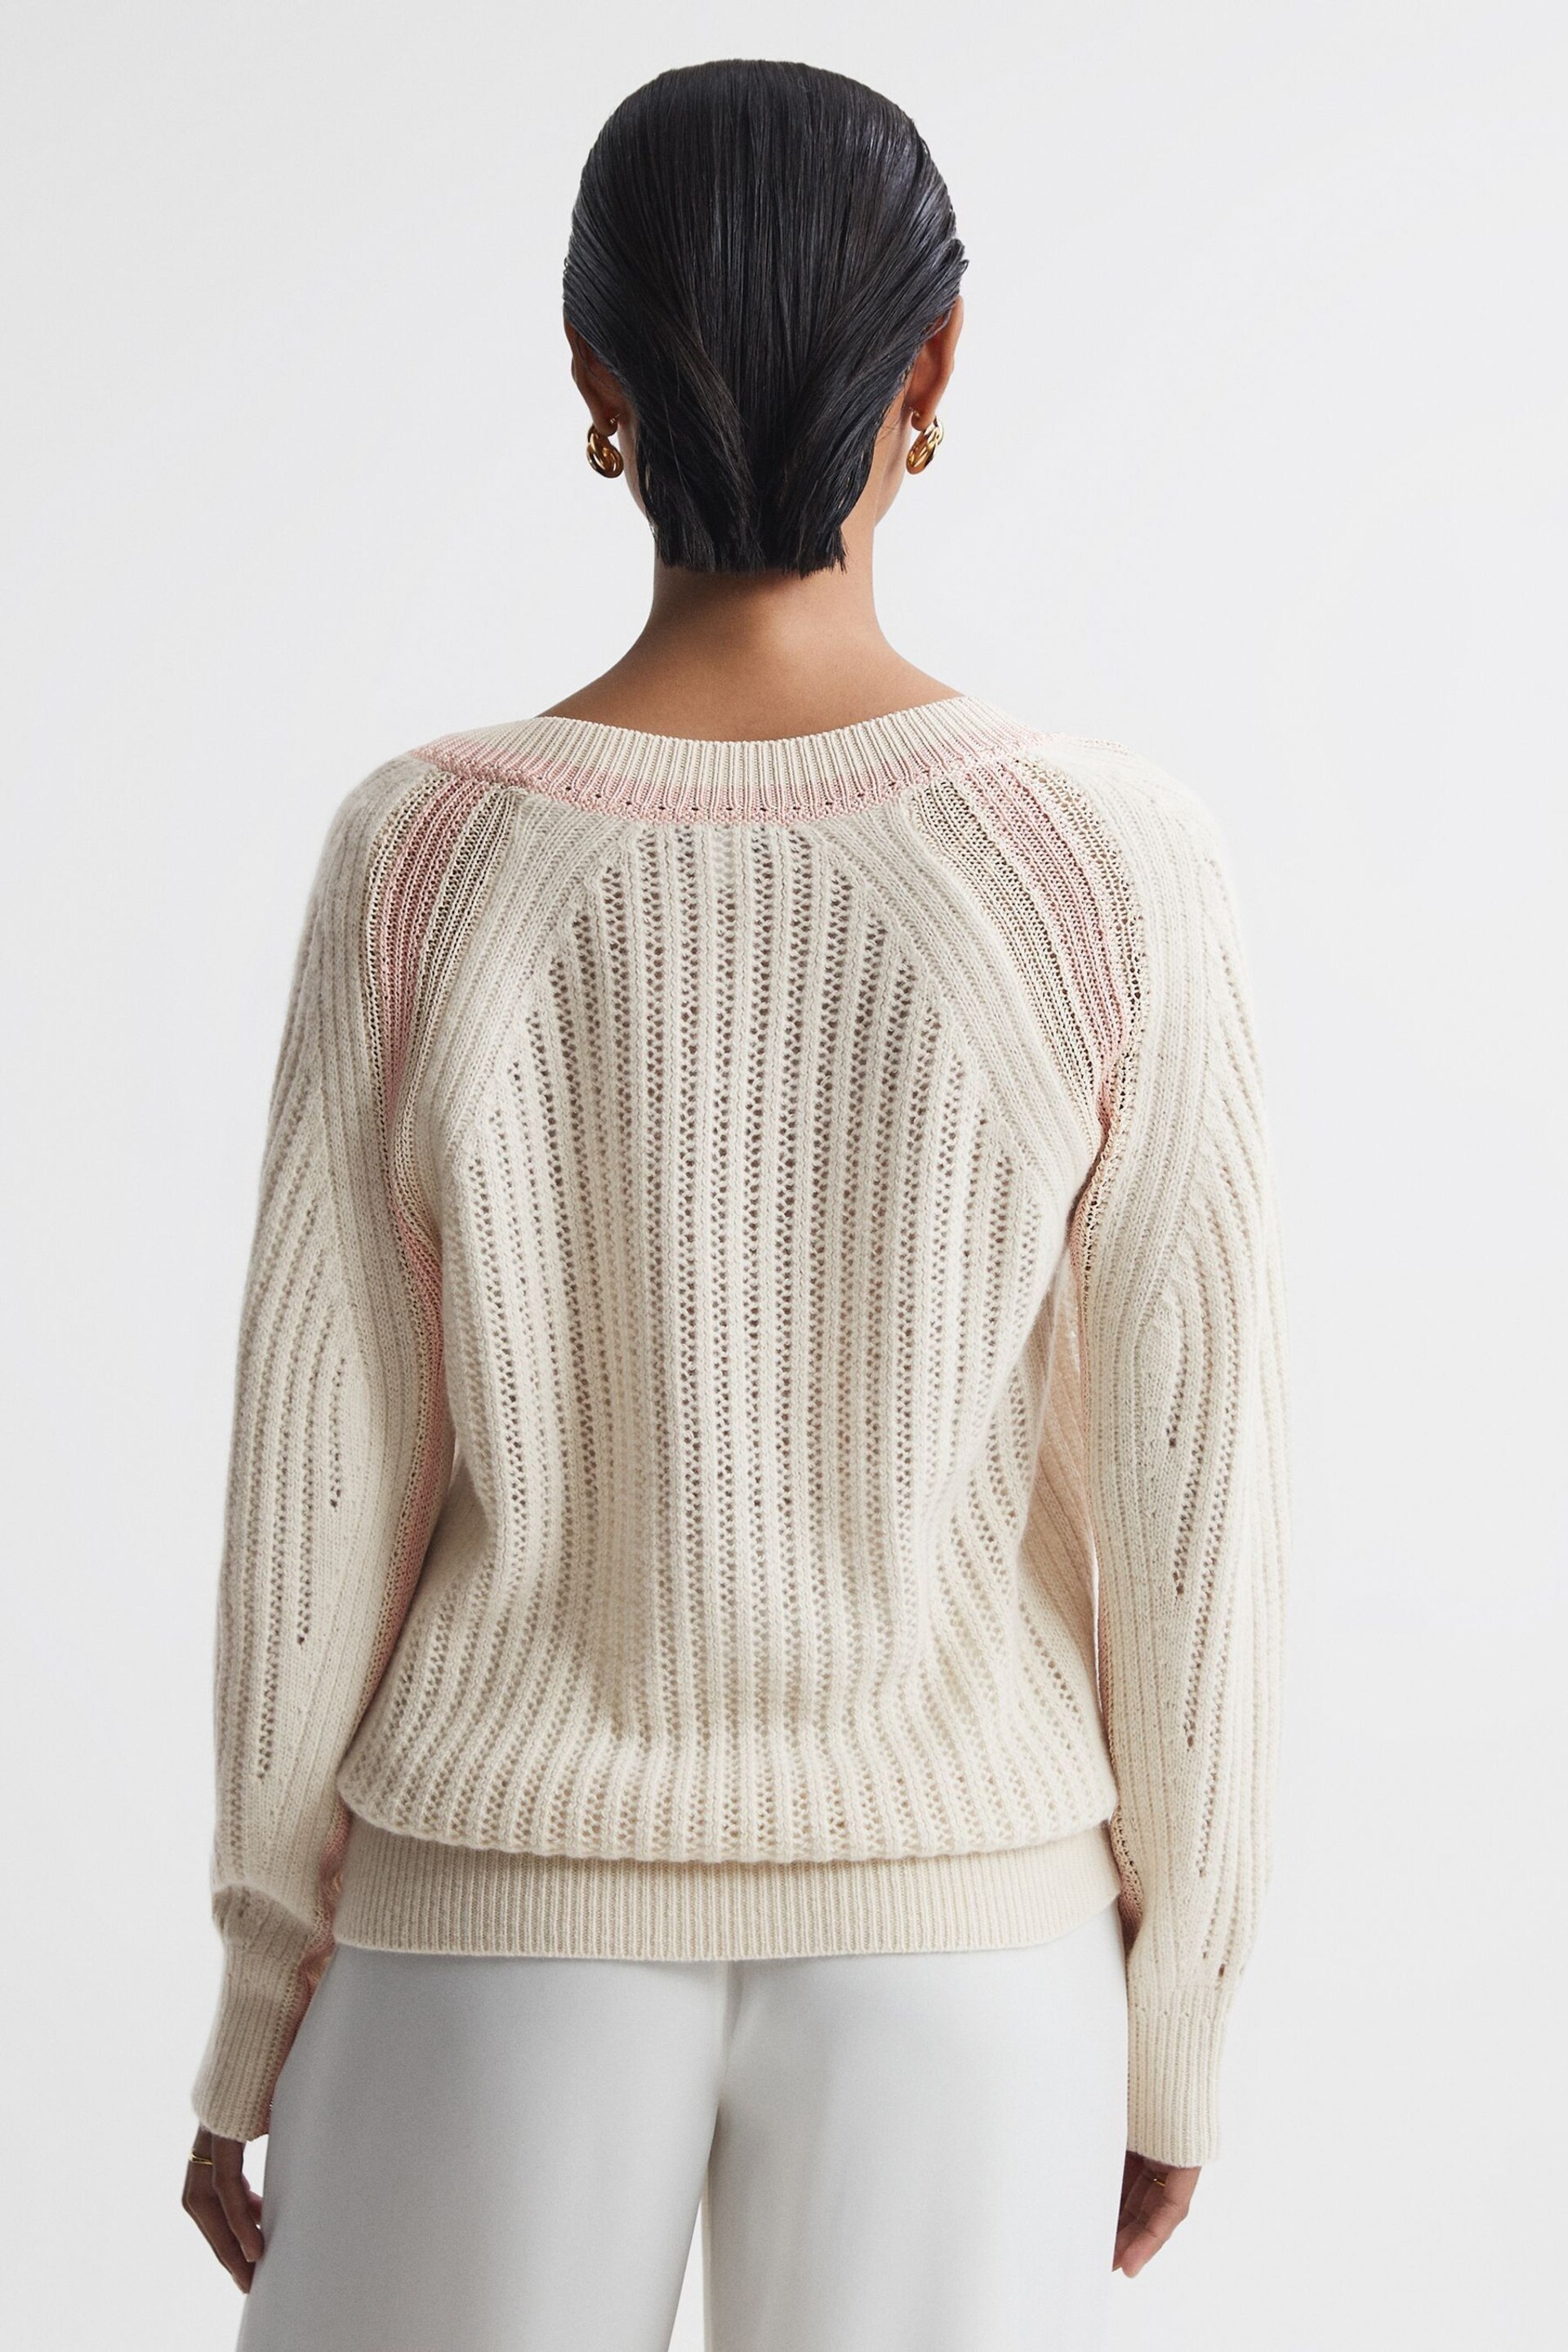 Reiss Cream/Nude Vale Wool Blend Knitted V-Neck Jumper - Image 5 of 5